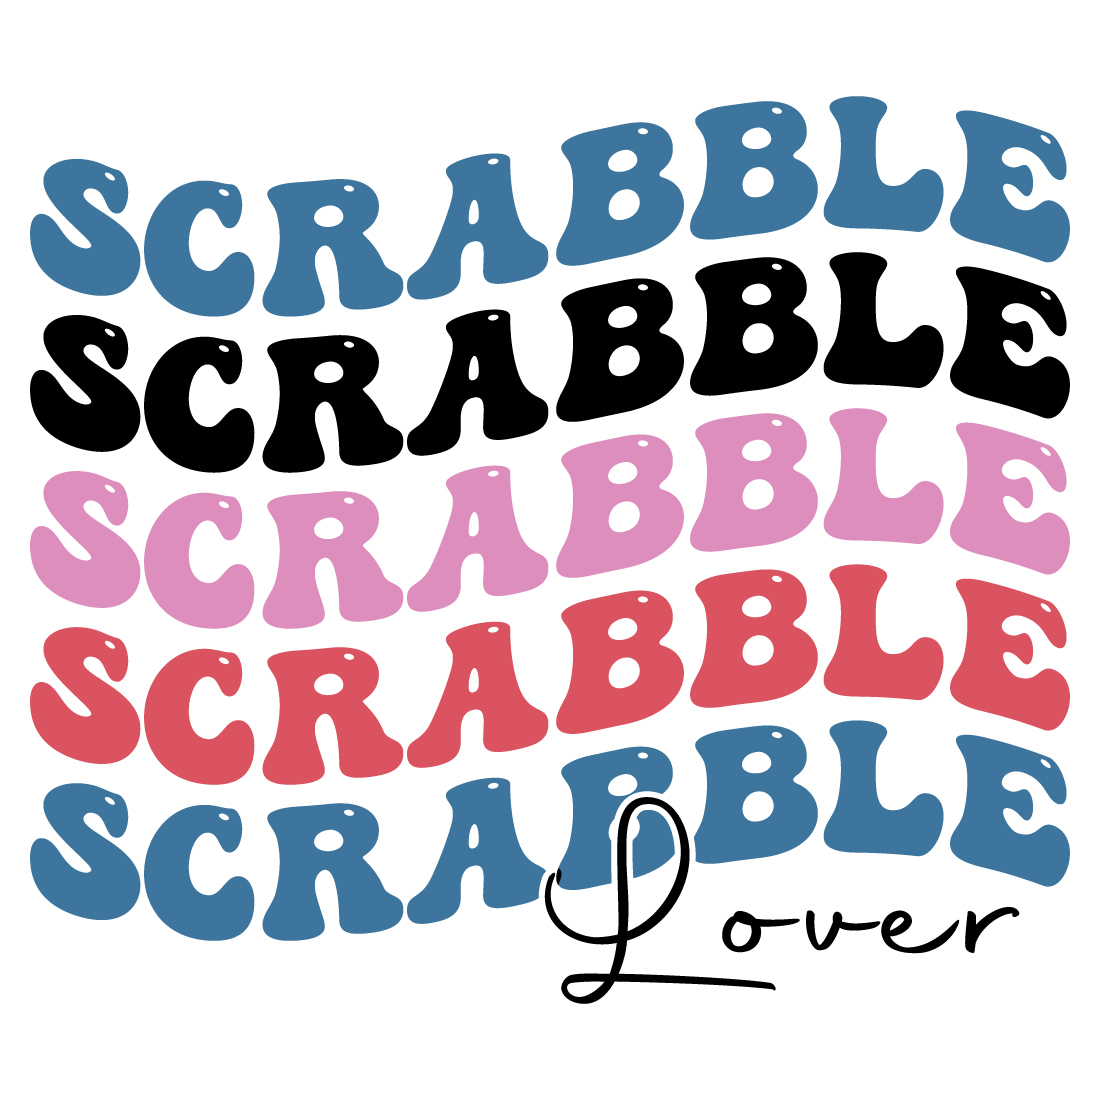 Scrabble lover indoor game retro typography design for t-shirts, cards, frame artwork, phone cases, bags, mugs, stickers, tumblers, print, etc preview image.